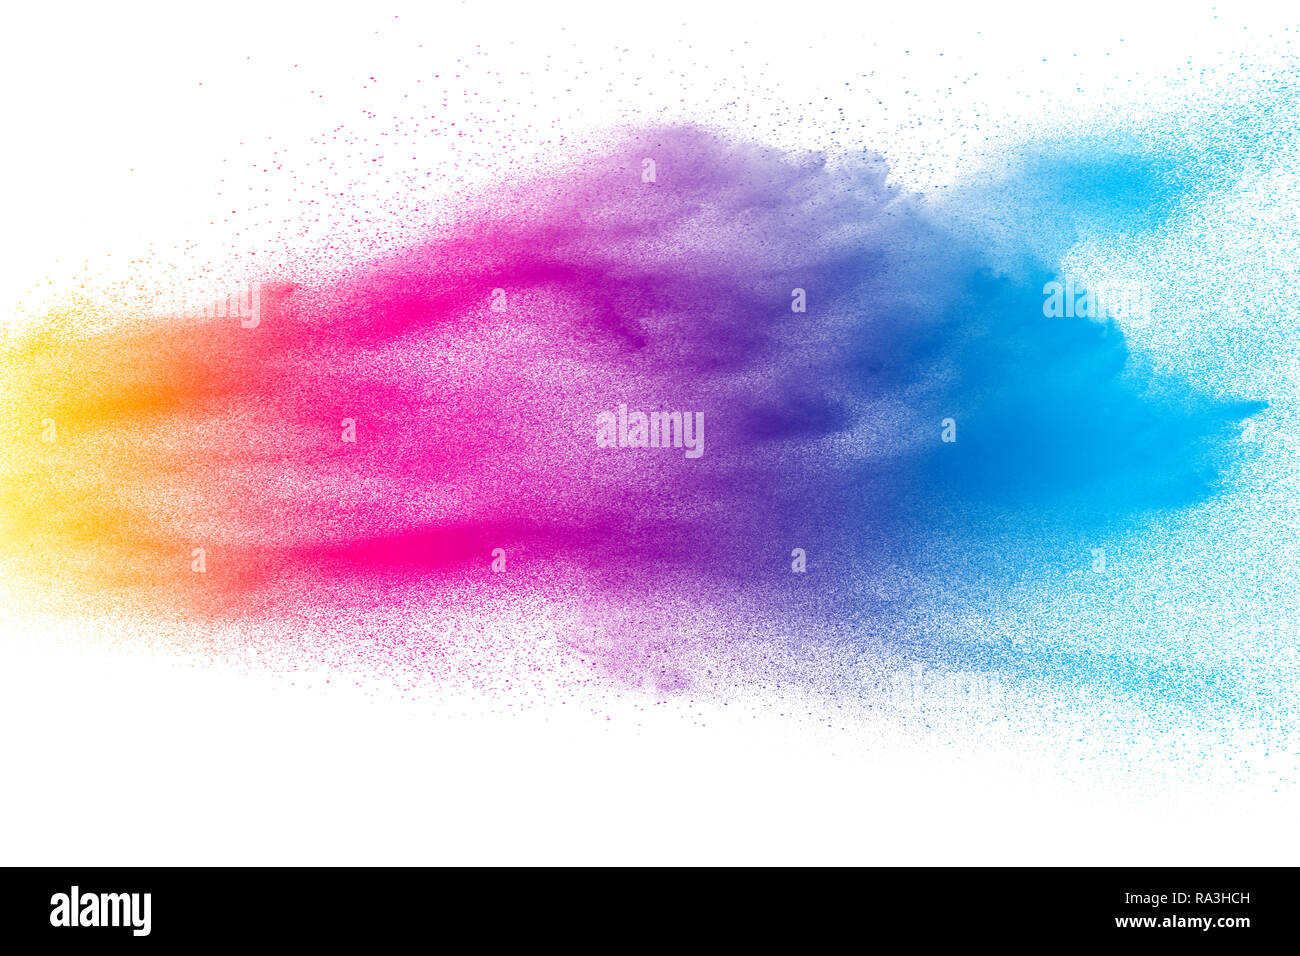 Multi color powder explosion on white background. Launched colorful dust particles splashing. Stock Photo